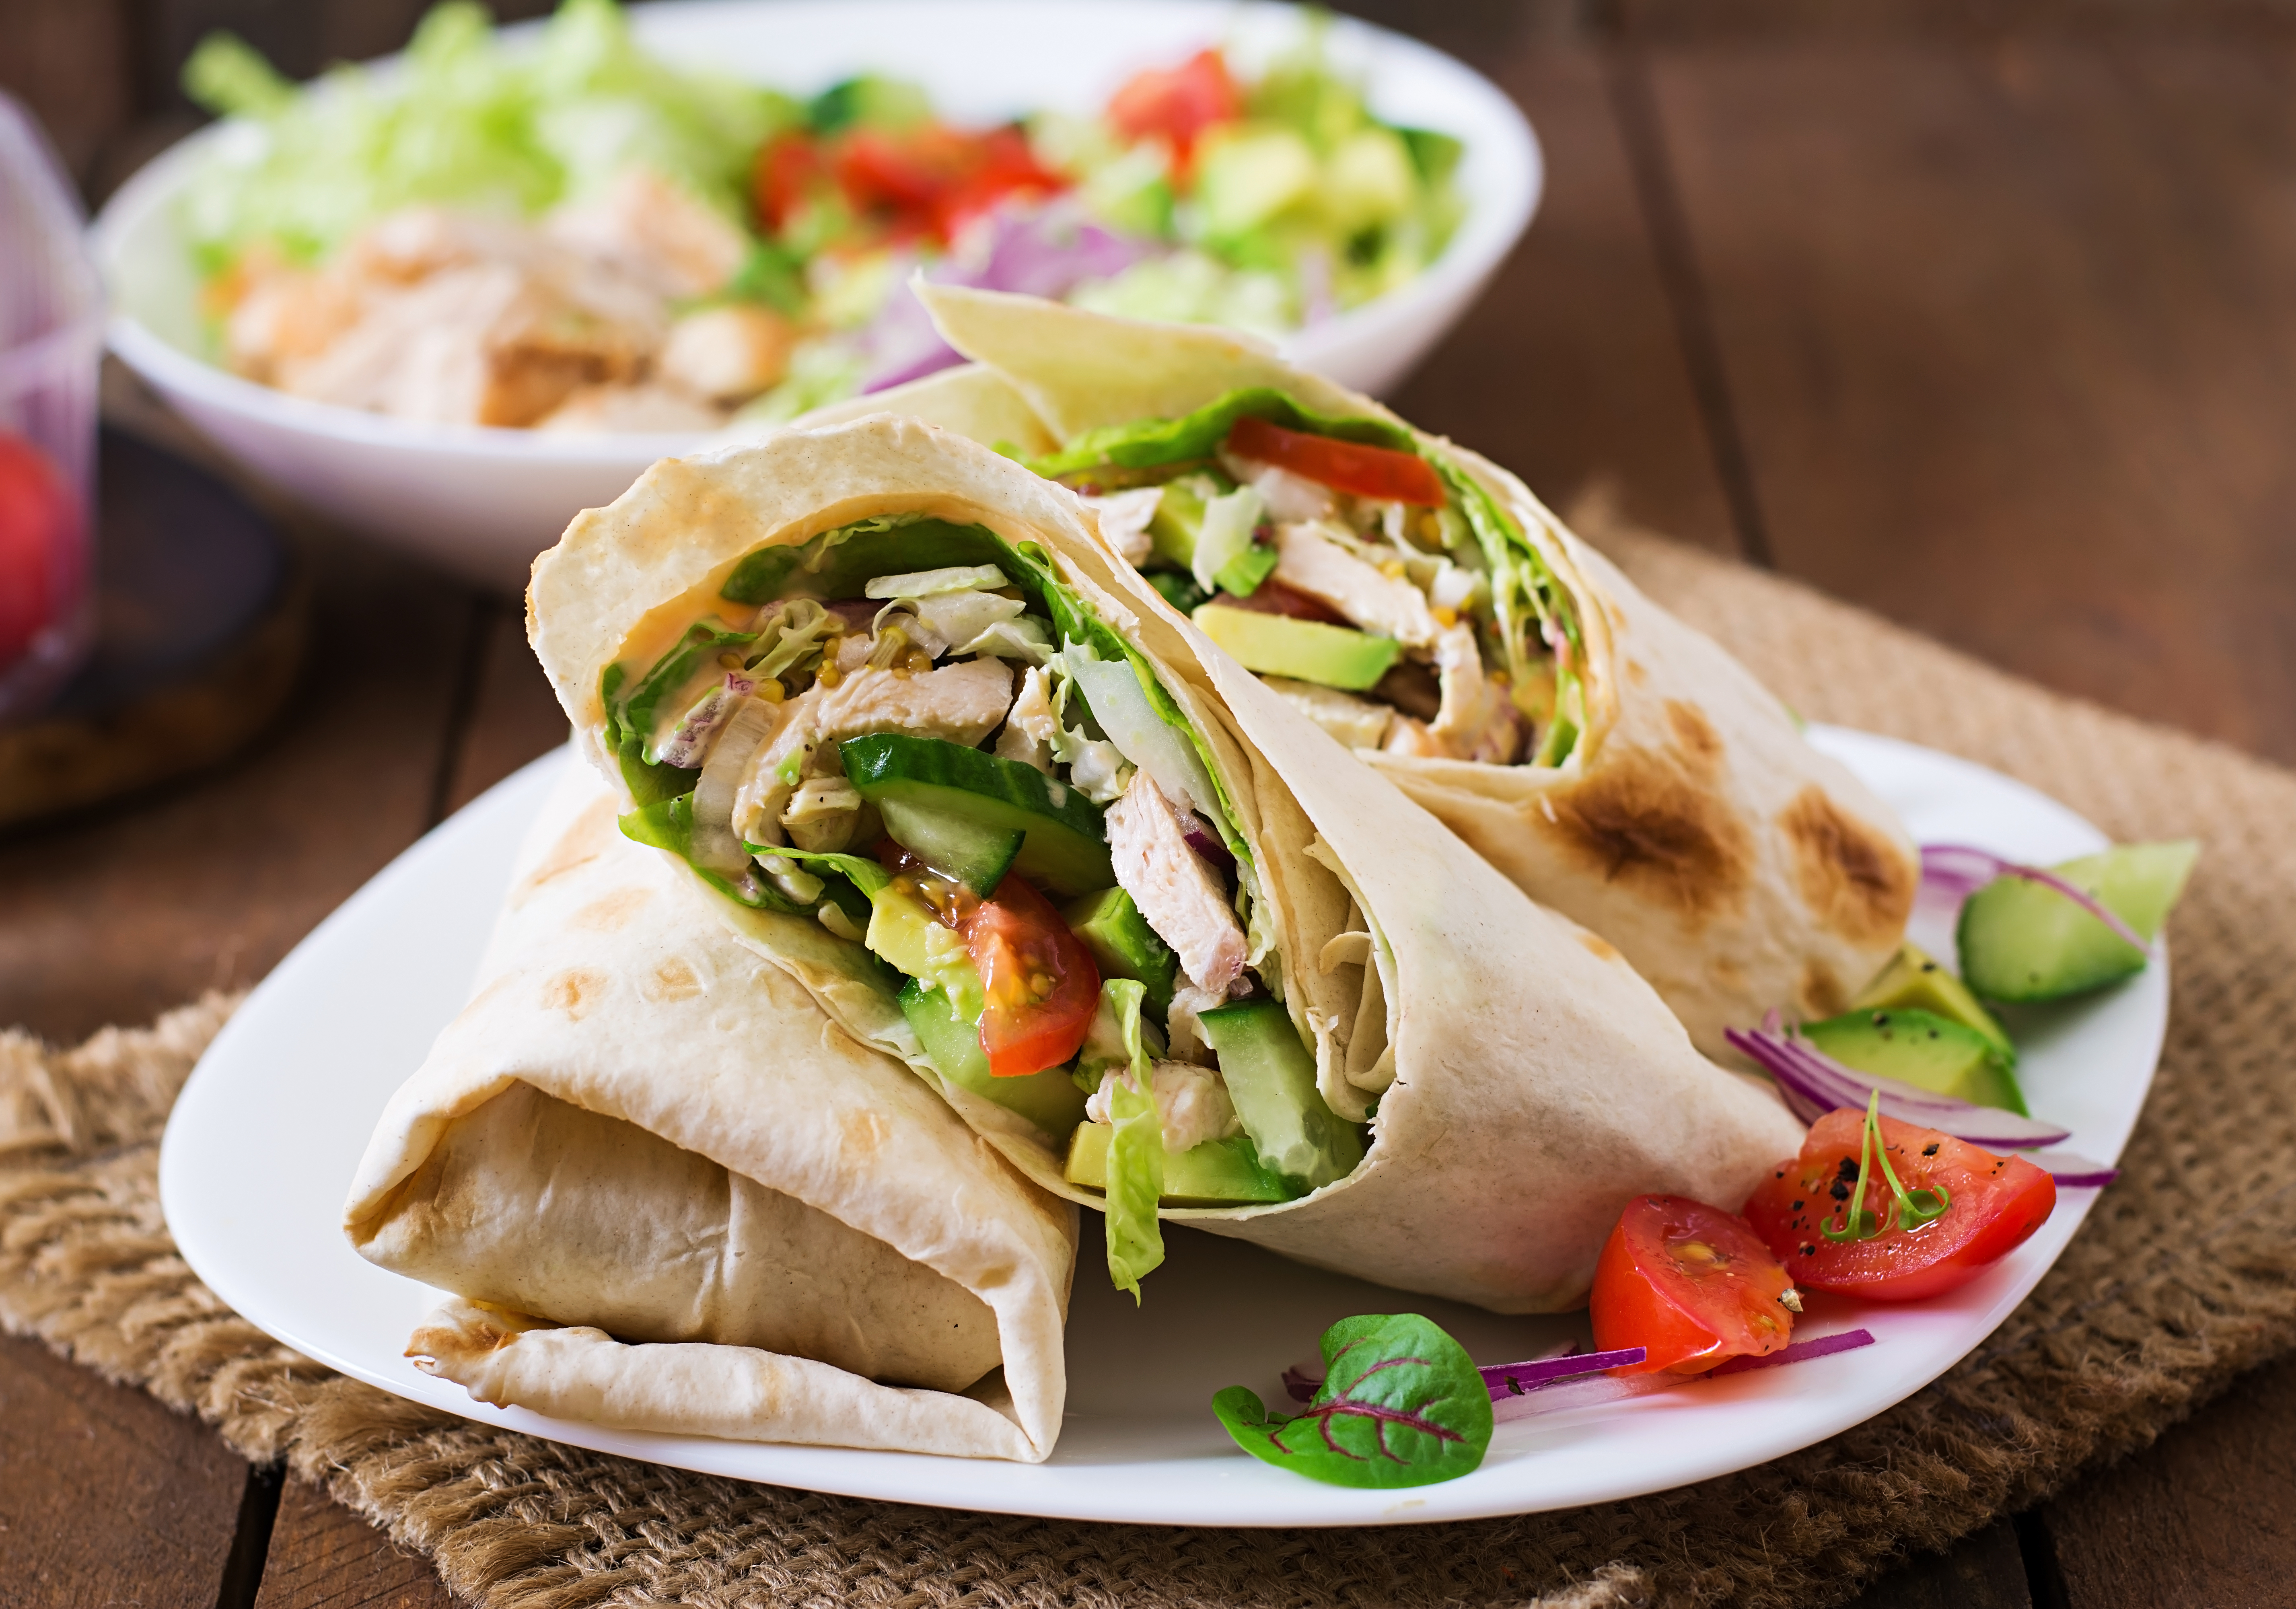 For a healthier meal switch to wholegrain wraps and wholegrain bread